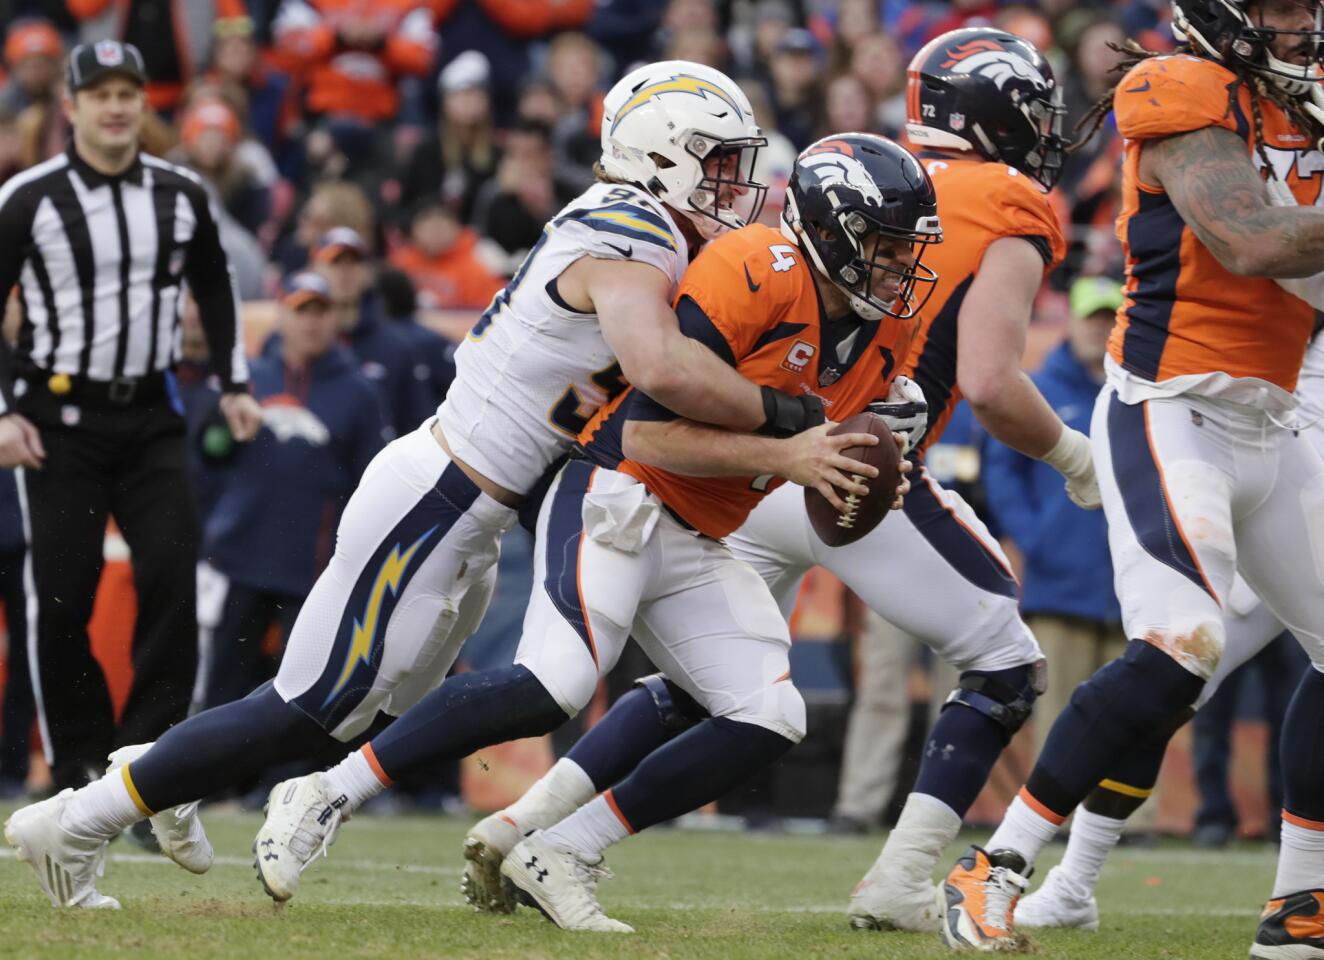 Chargers defensive end Joey Bosa sacks Broncos quarterback Case Keenum during a second quarter drive at Mile High Stadium.